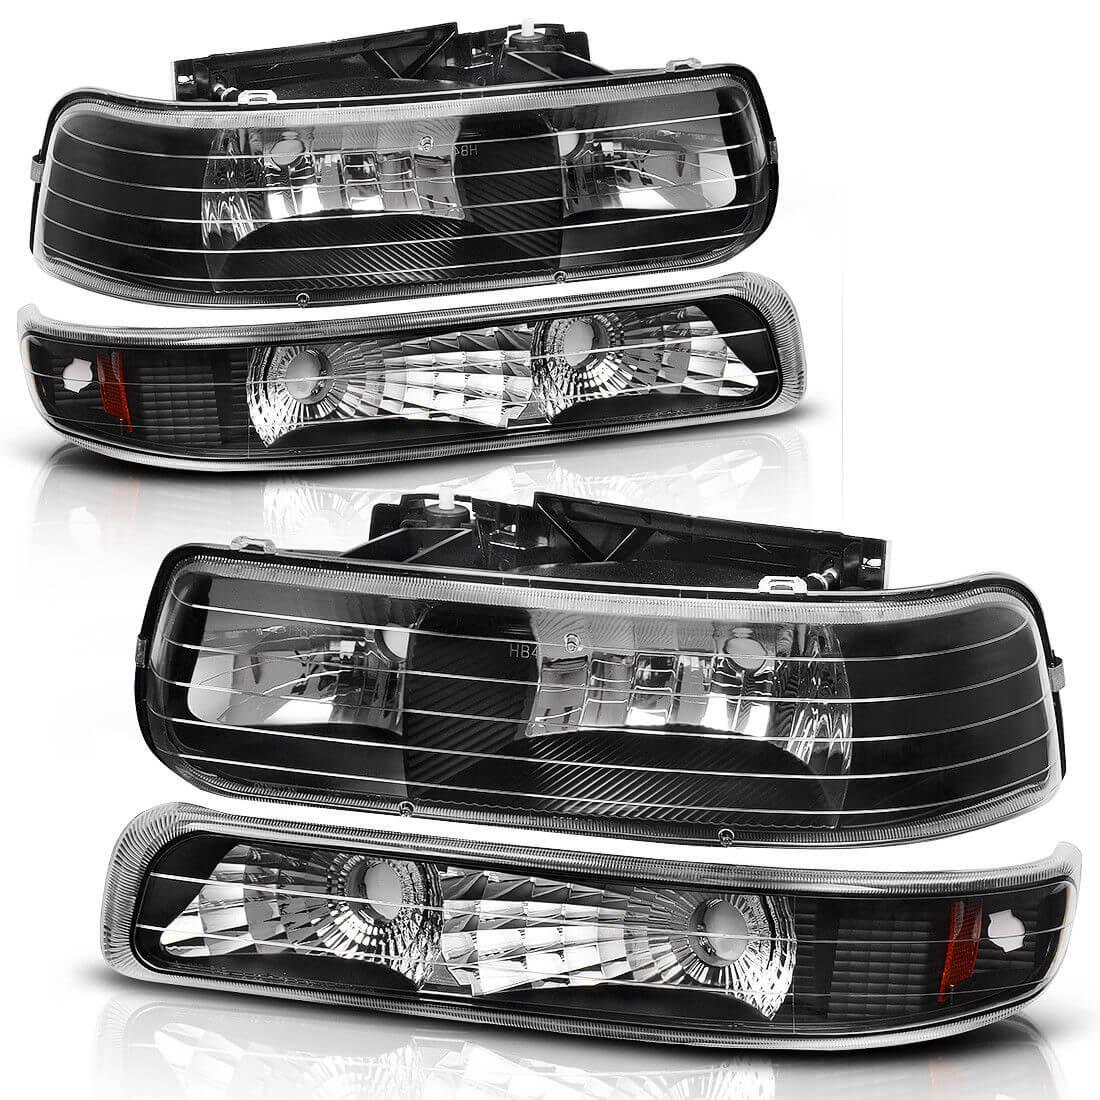 Compatible For Chevy Silverado 1500 2500 99-02 Silverado 3500 01-02 /Compatible For Chevy SUBURBAN Tahoe 00-06 Replacement Bumper Fog Lights Driving Lamps Left and Right Side 